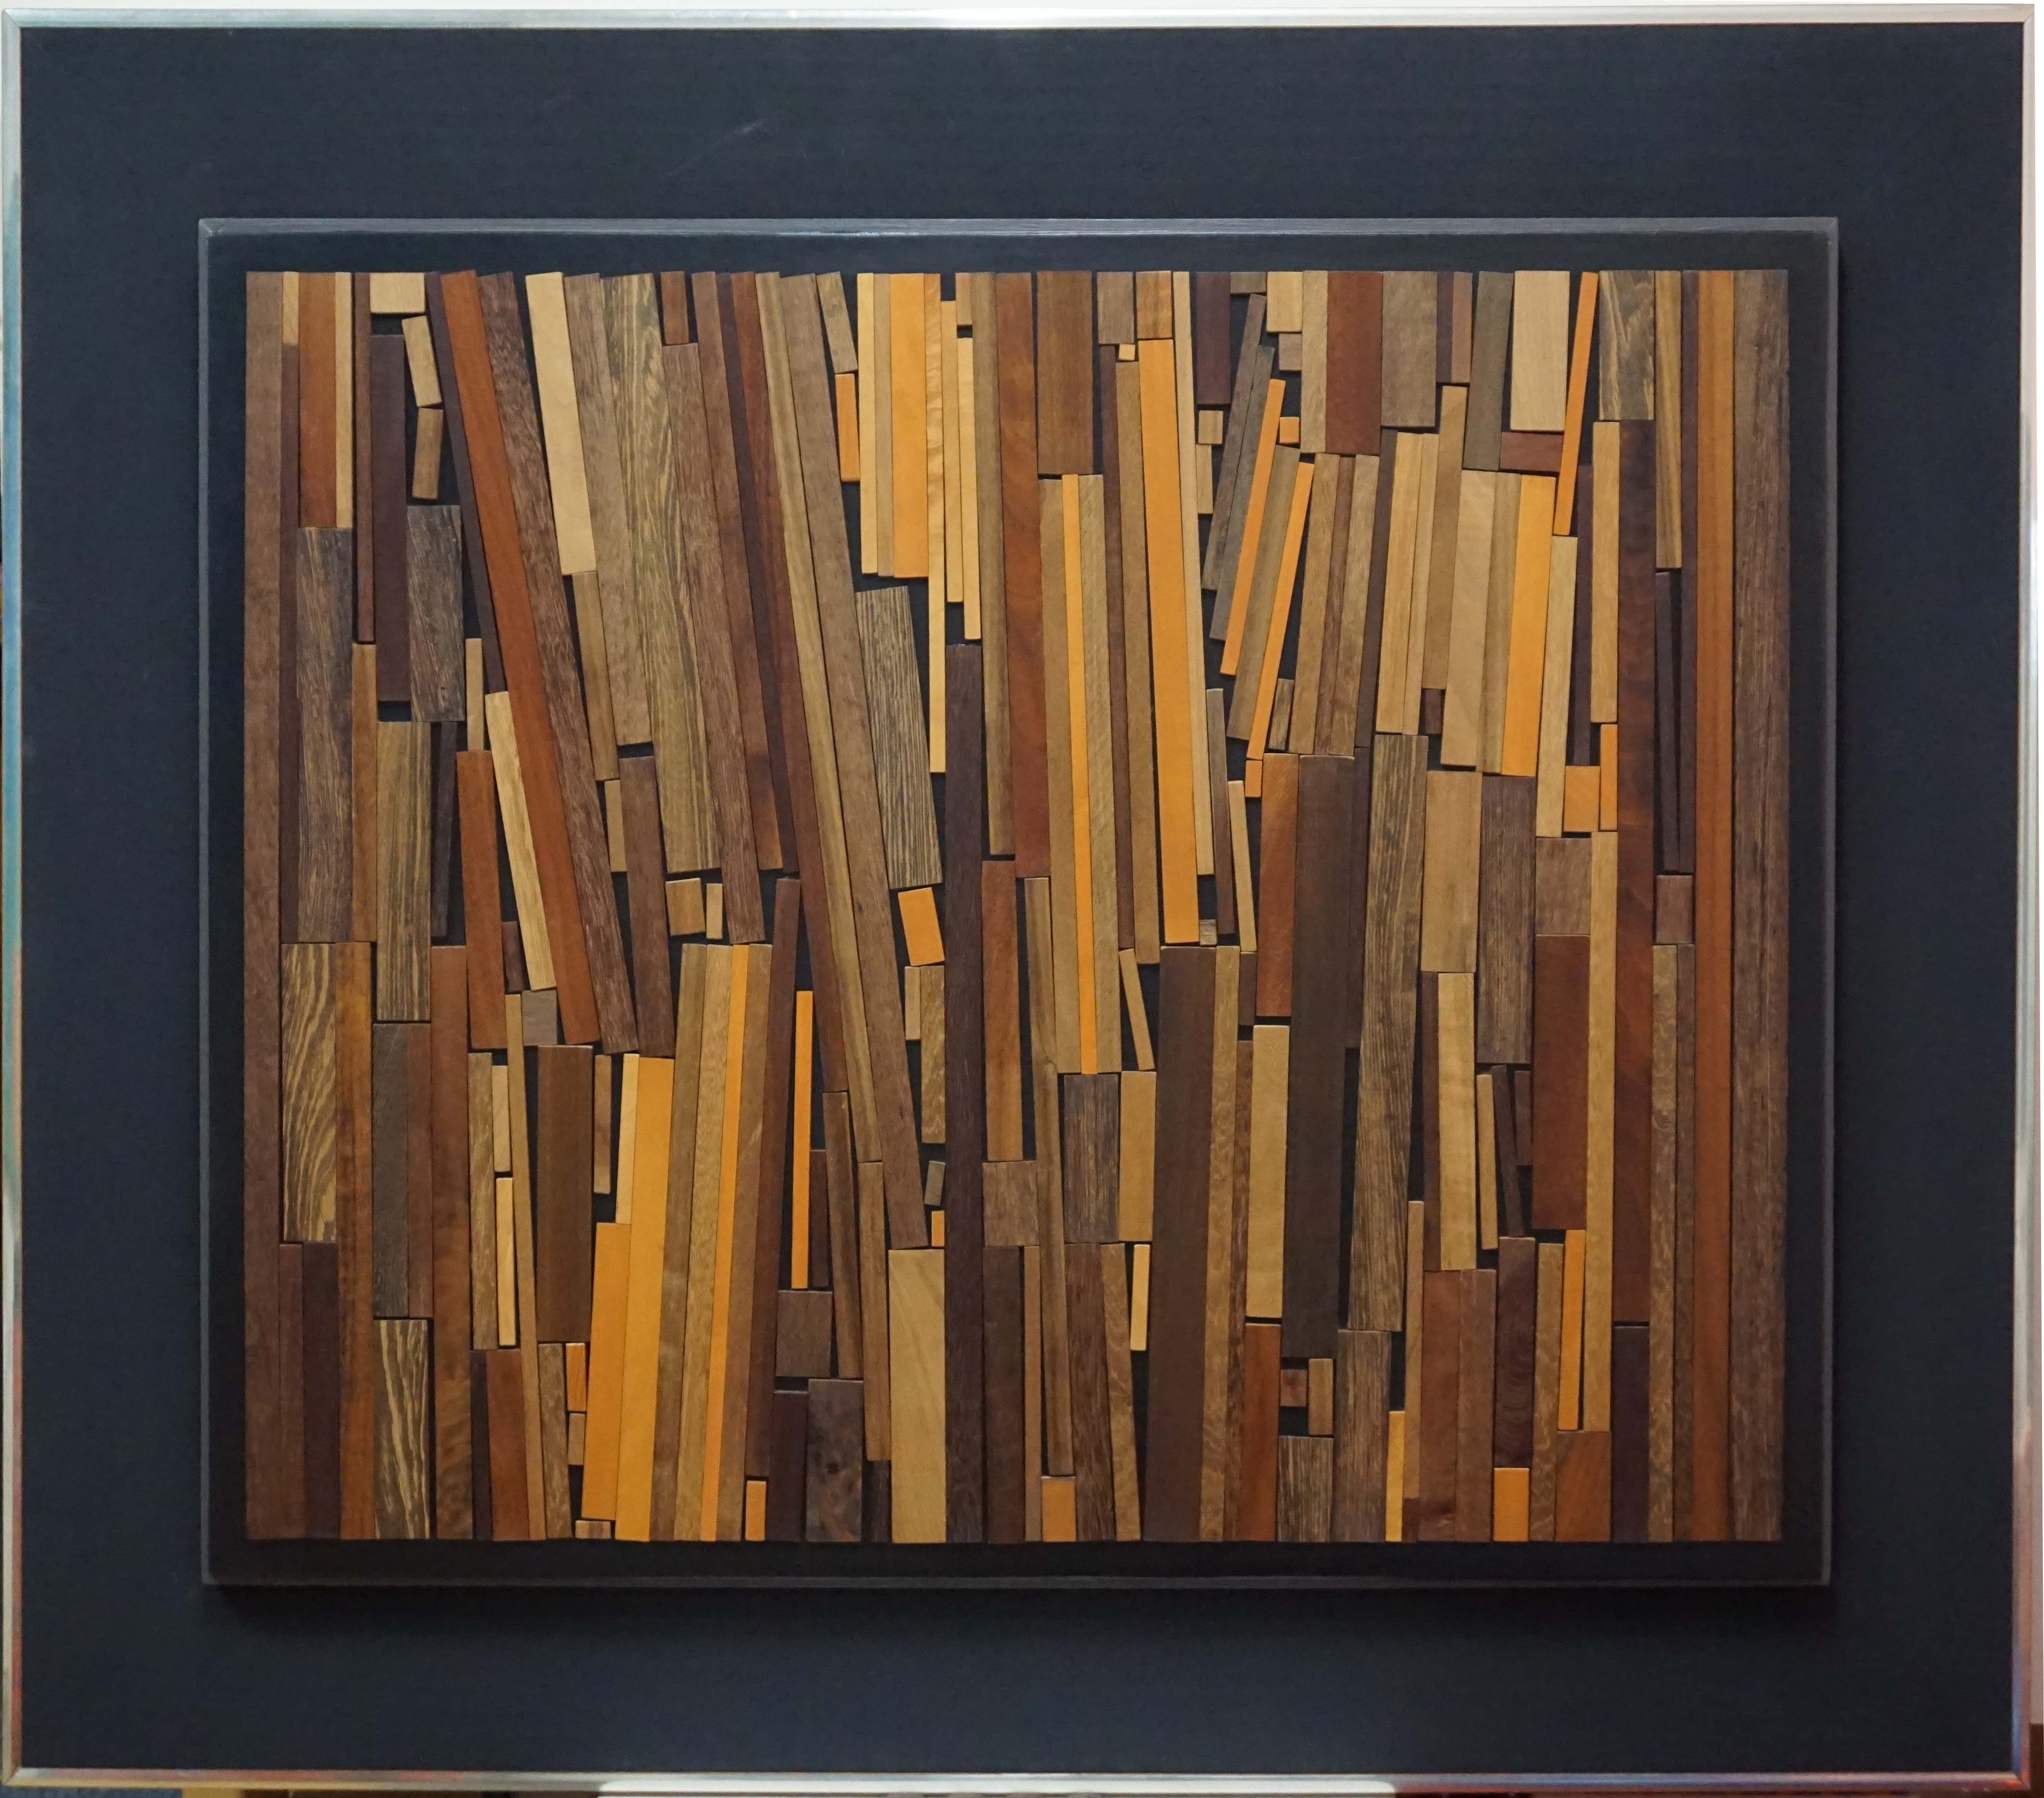 “Nature’s colors”, 1998, 43x37x3” wood relief